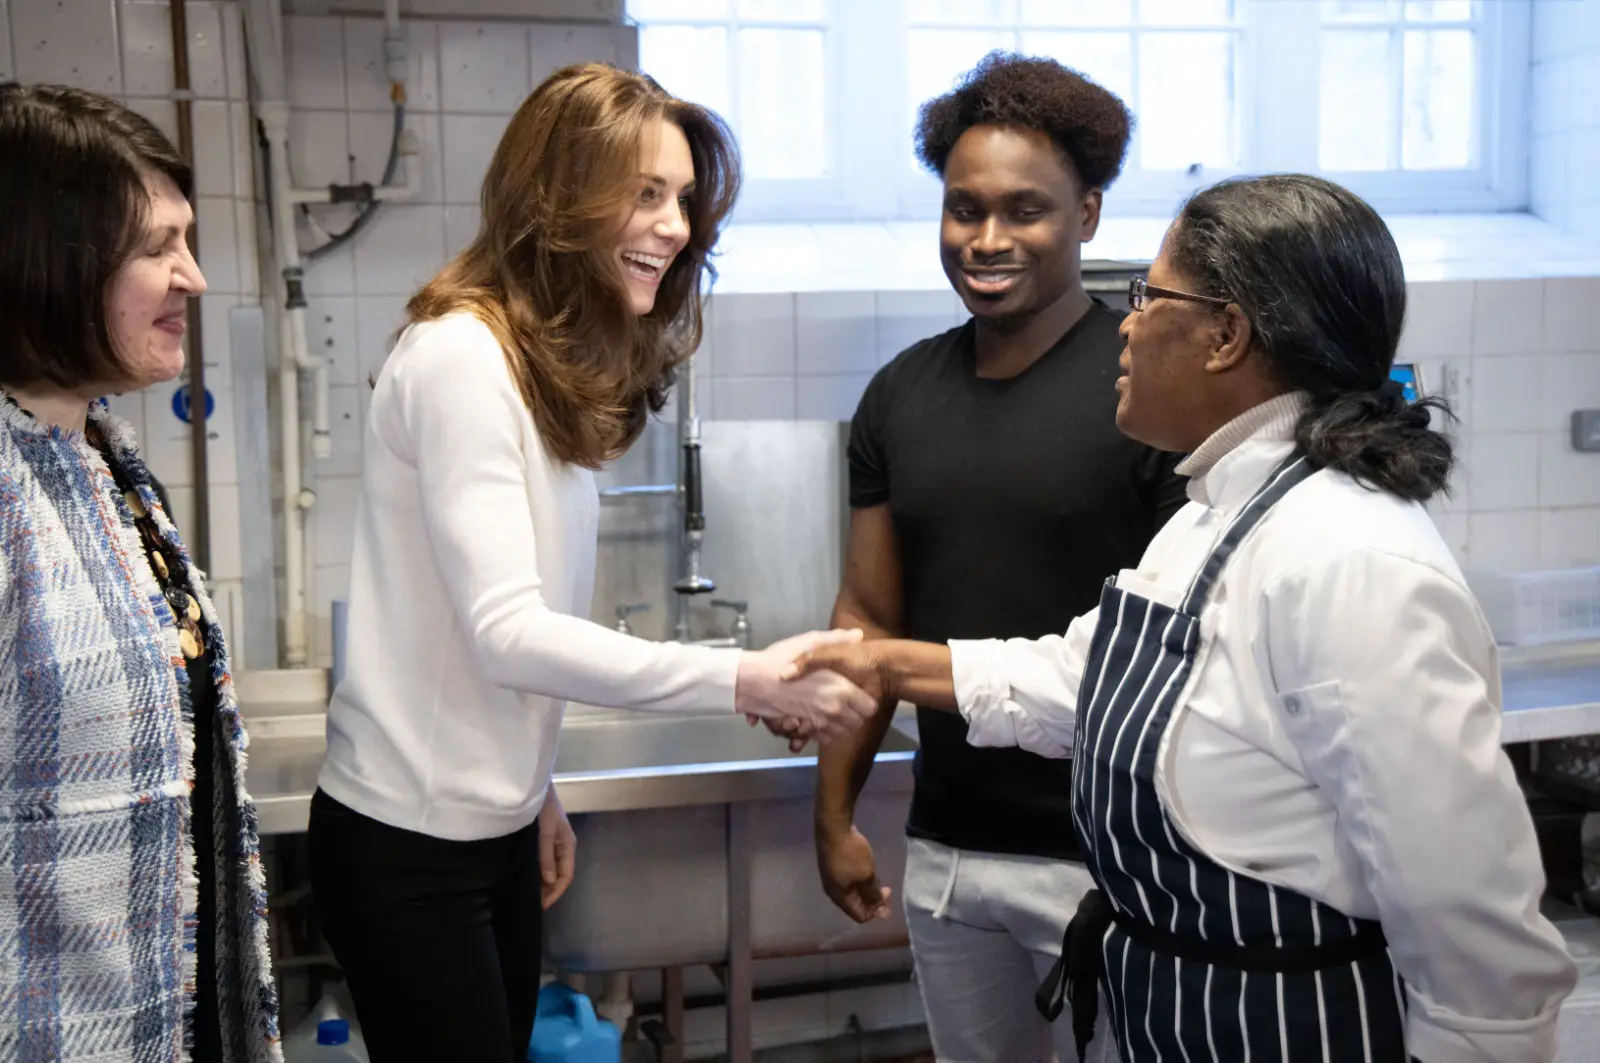 The Duchess of Cambridge met with the staff at the LEYF Early Years Chef Academy